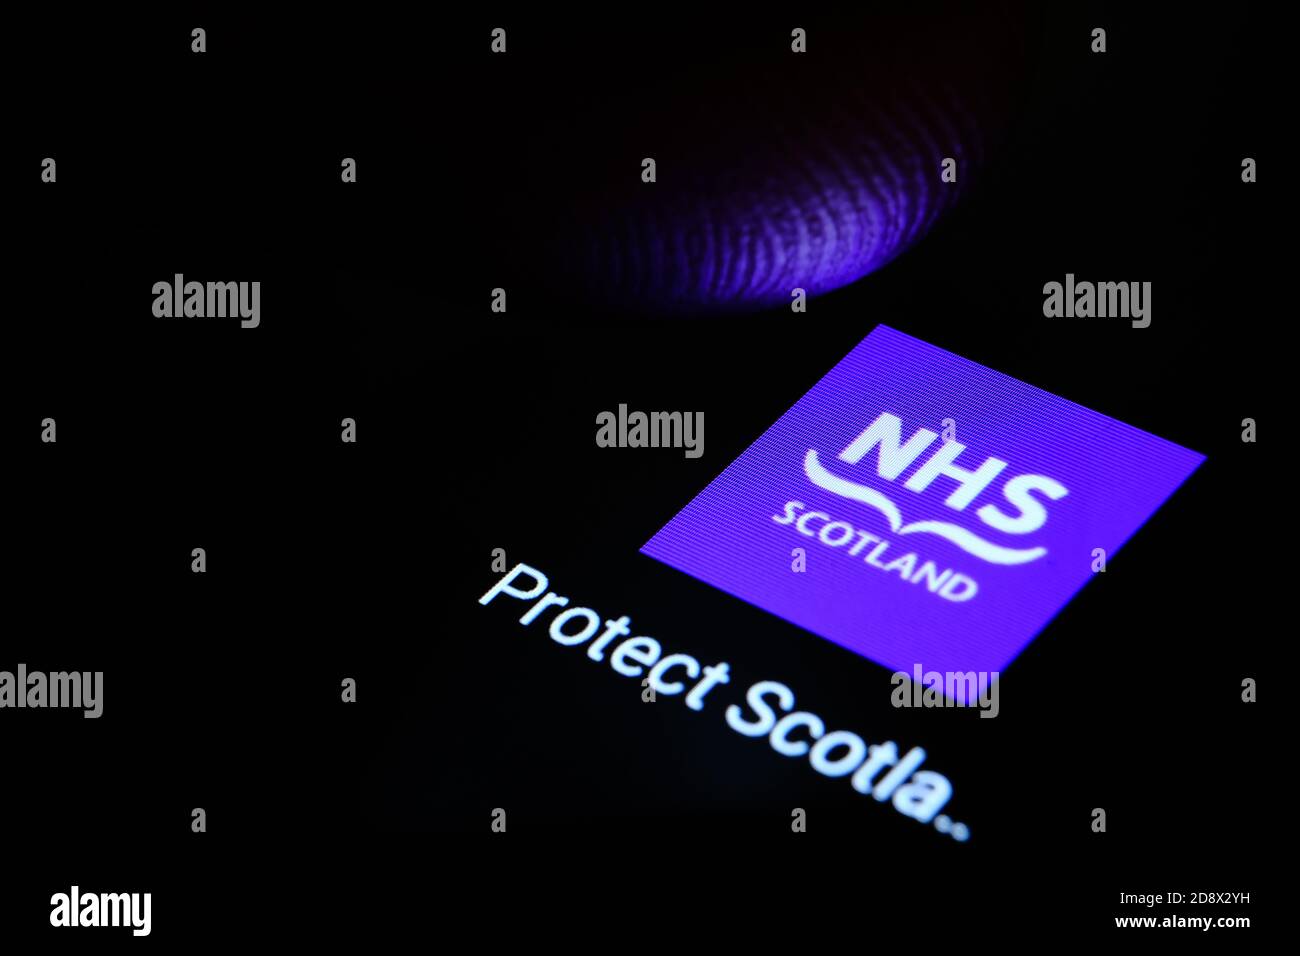 NHS SCOTLAND app seen on the dark screen of smartphone and a blurred finger above it. Contact tracing app. Stock Photo